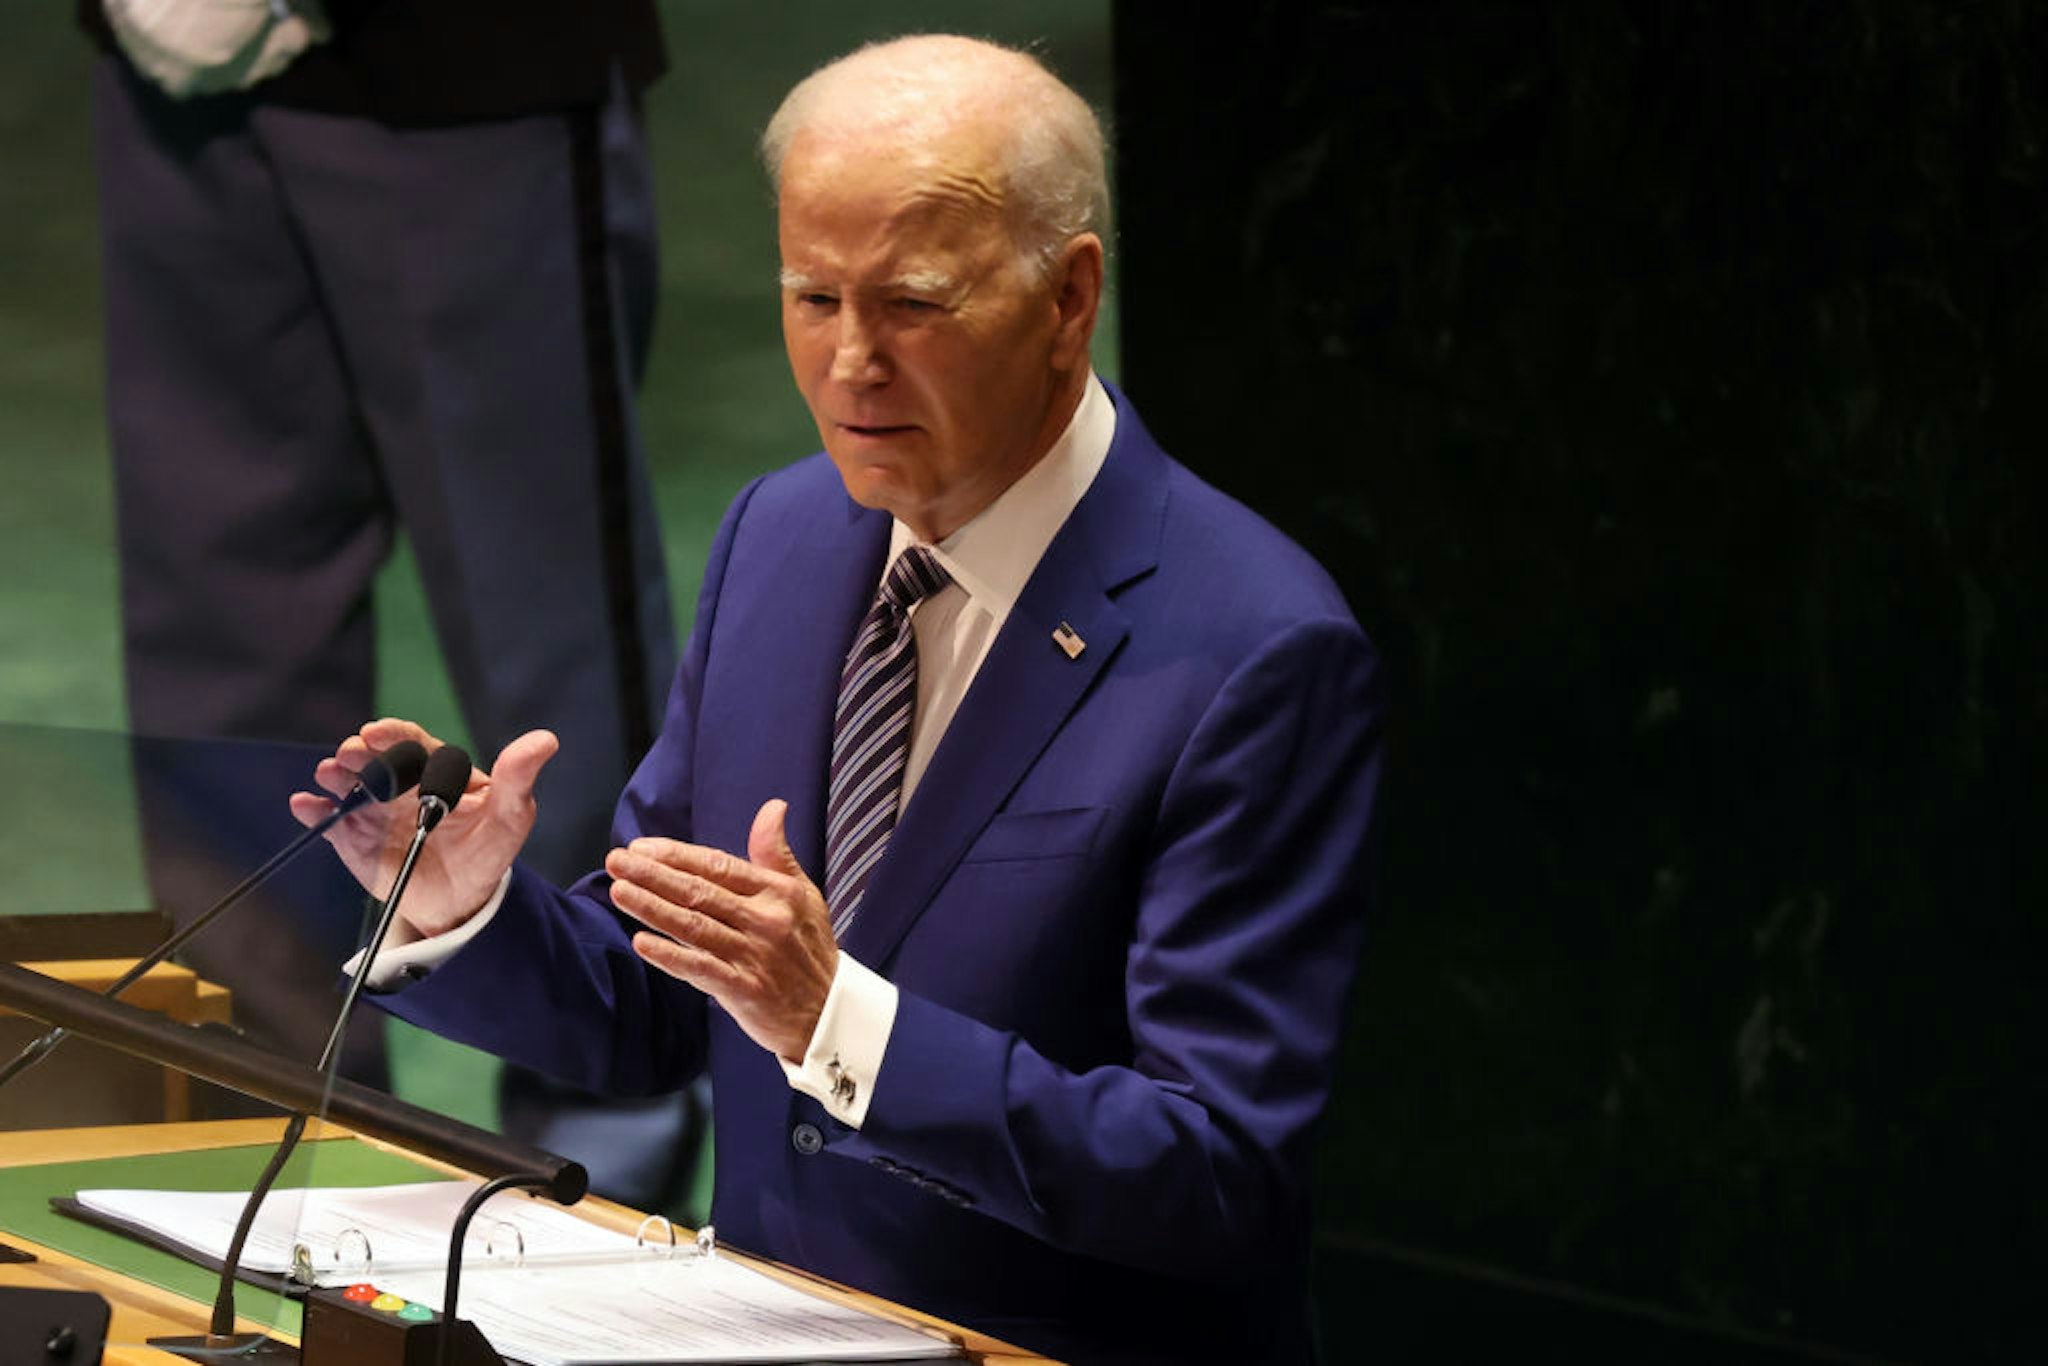 NEW YORK, NEW YORK - SEPTEMBER 19: US President Joe Biden addresses world leaders during the United Nations (UN) General Assembly on September 19, 2023 in New York City. Dignitaries and their delegations from across the globe have descended on New York for the annual event. This year marks the 78th session of the General Debate at the UN Headquarters and will focus on the crisis of global warming. (Photo by Spencer Platt/Getty Images)